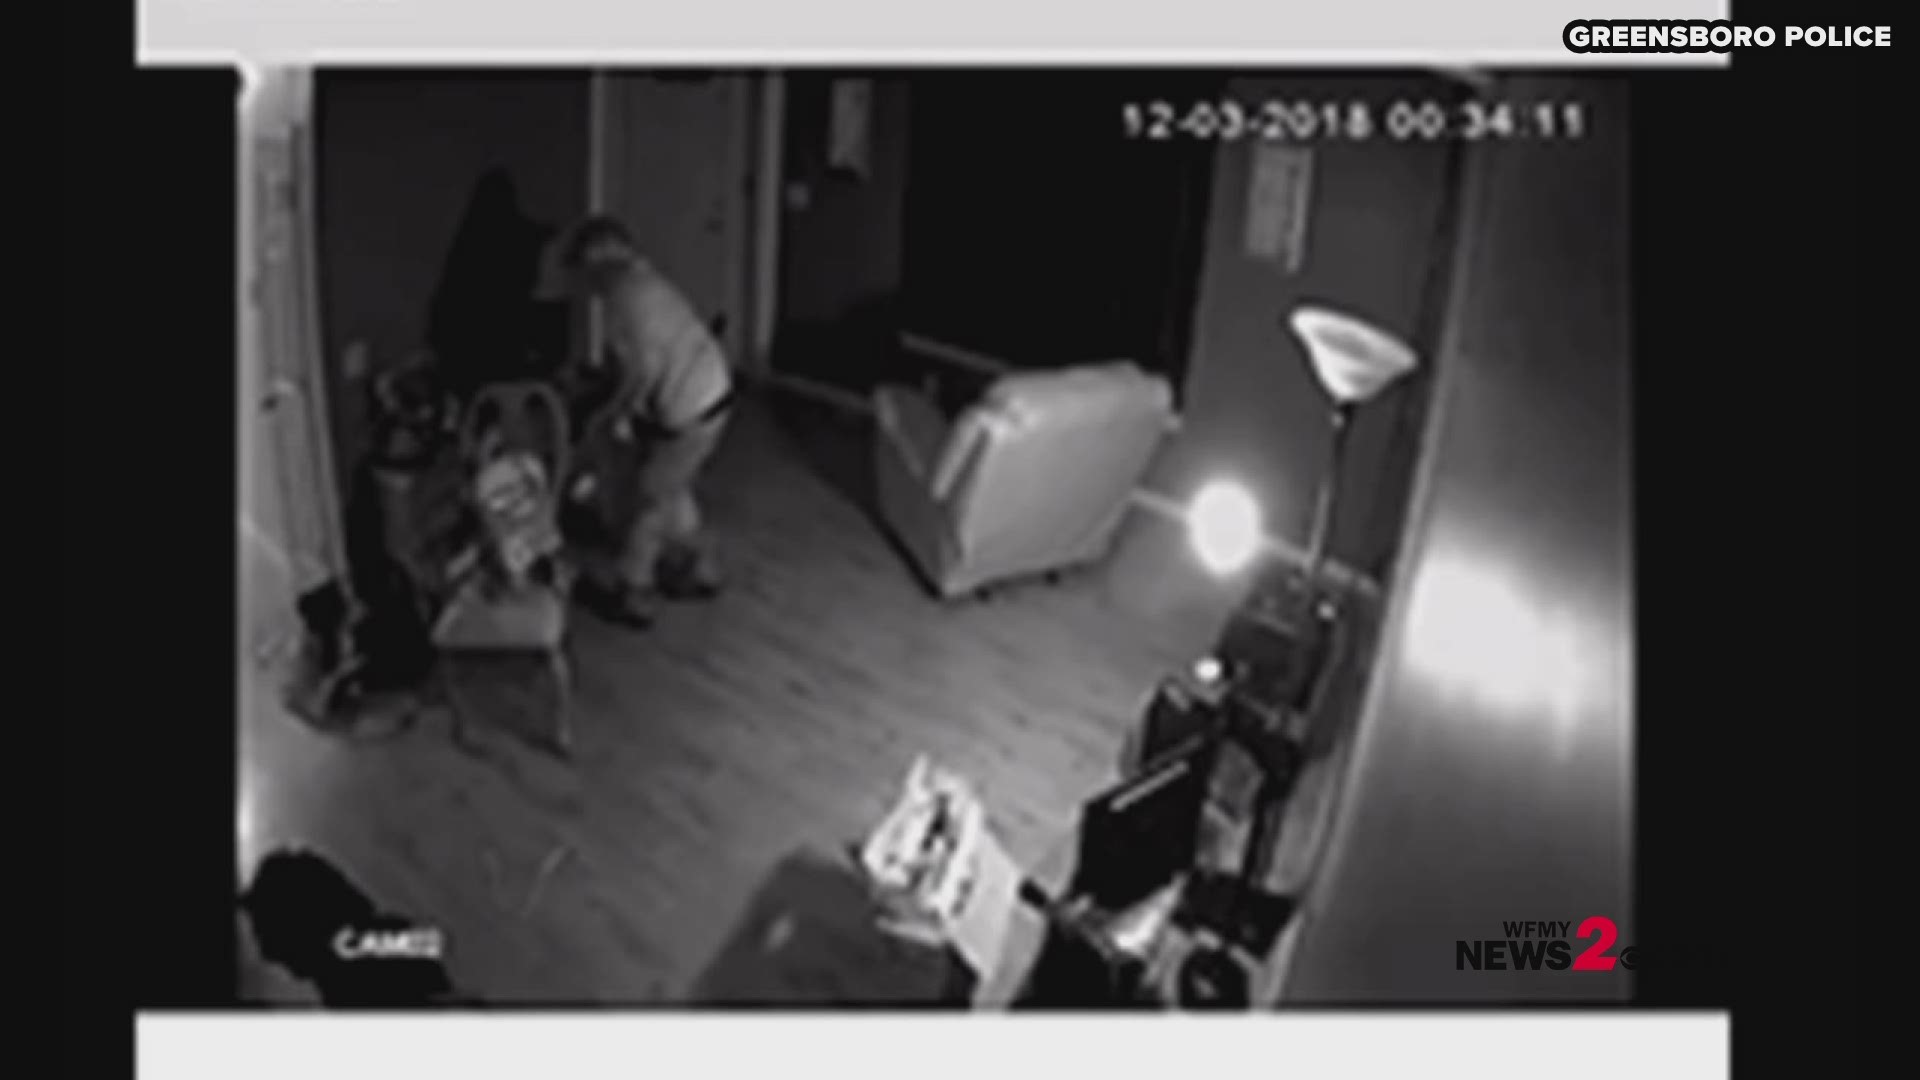 Investigators said on December 3, the man broke into the house on Markham Road in Greensboro but stole nothing. Surveillance photos captured the man walking around the house to check out various rooms.